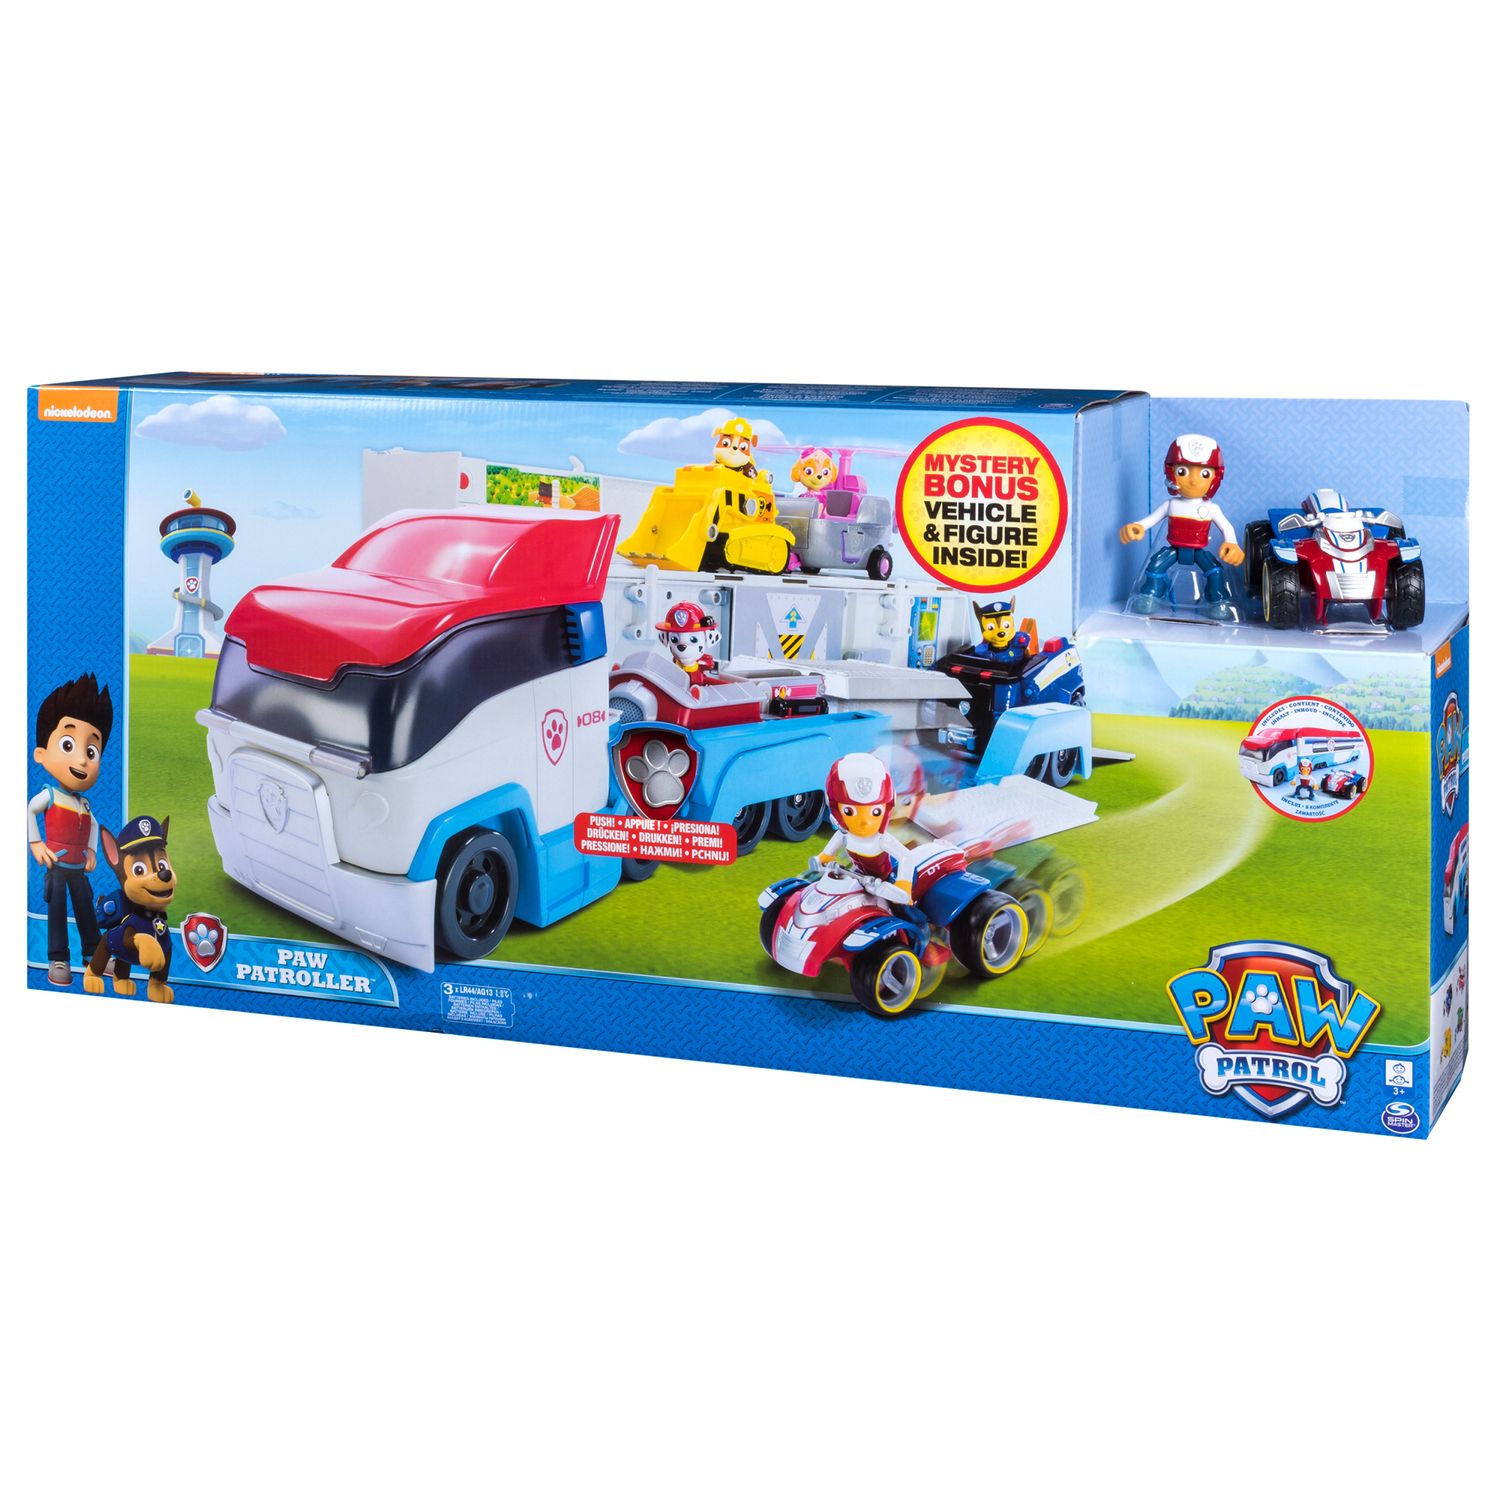 all the paw patrol toys